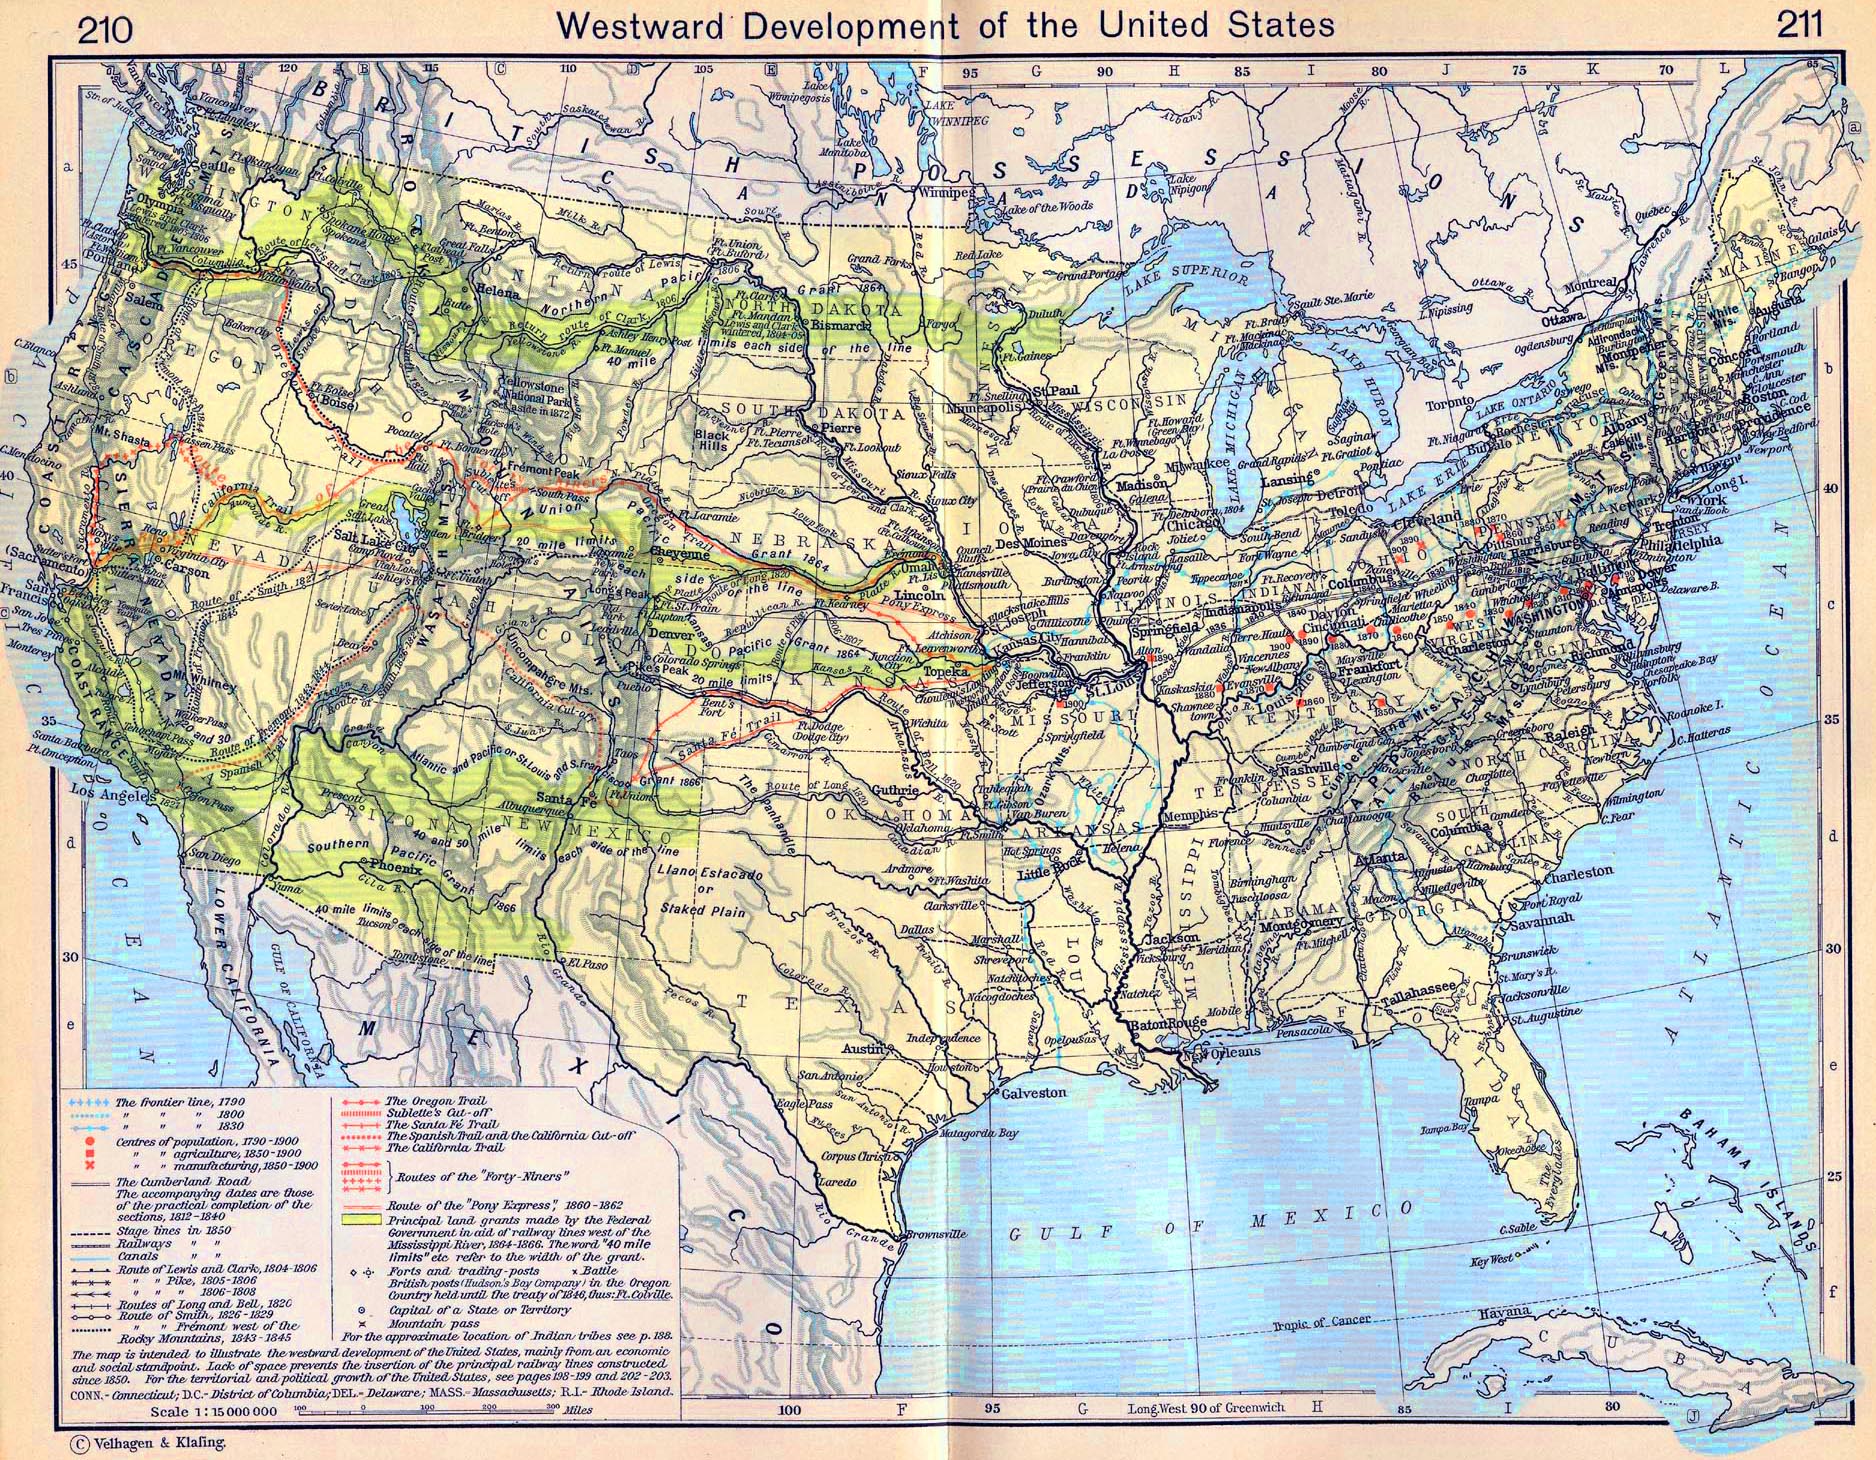 Map of the Westward Development of the United States, 1790-1900